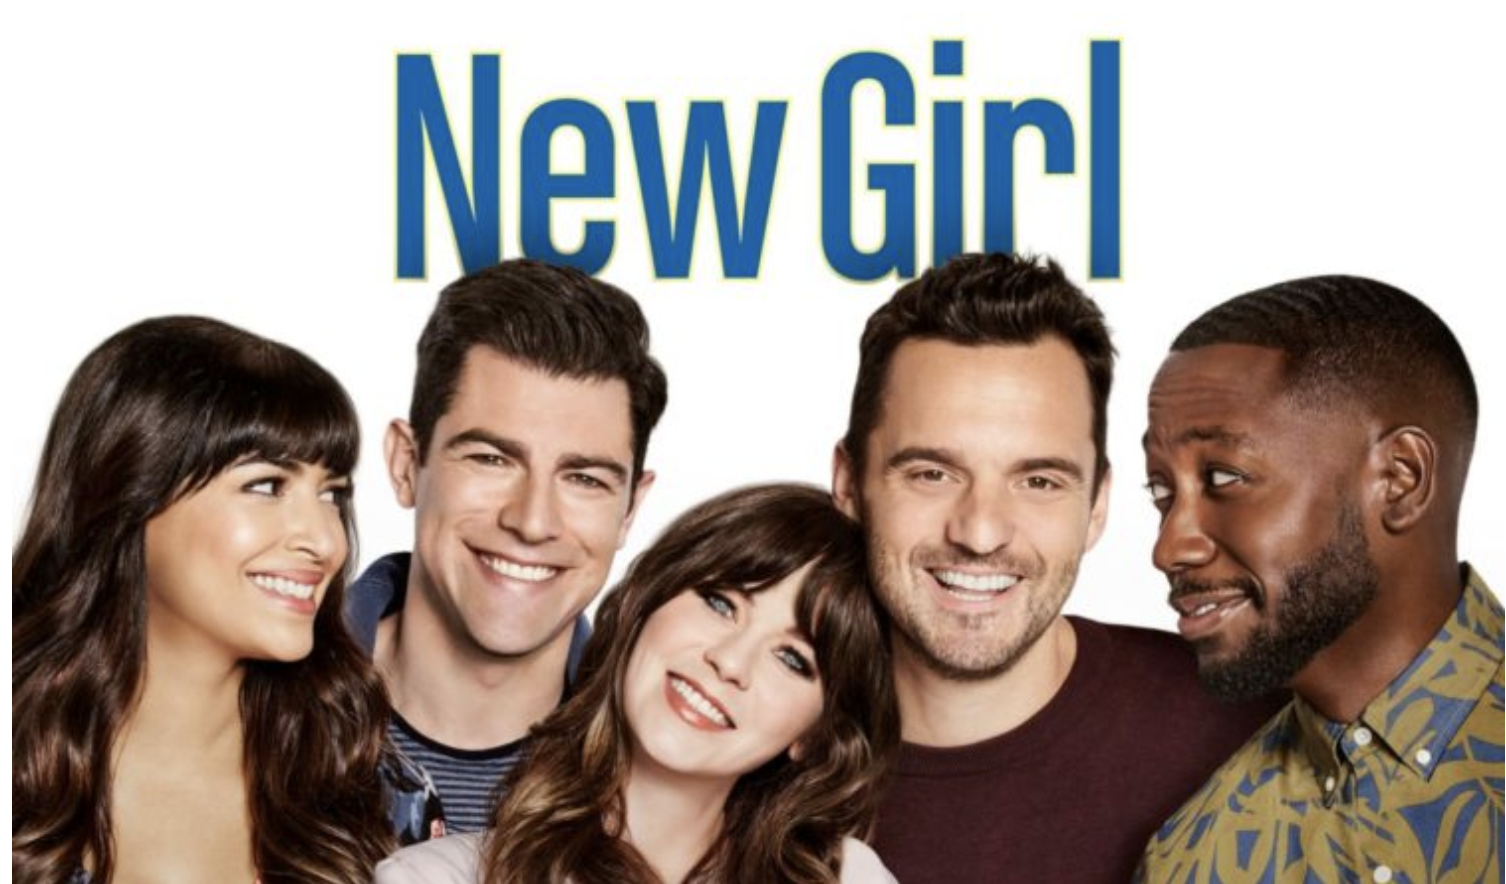 Cast members from the television show New Girl pose for a publicity photo.